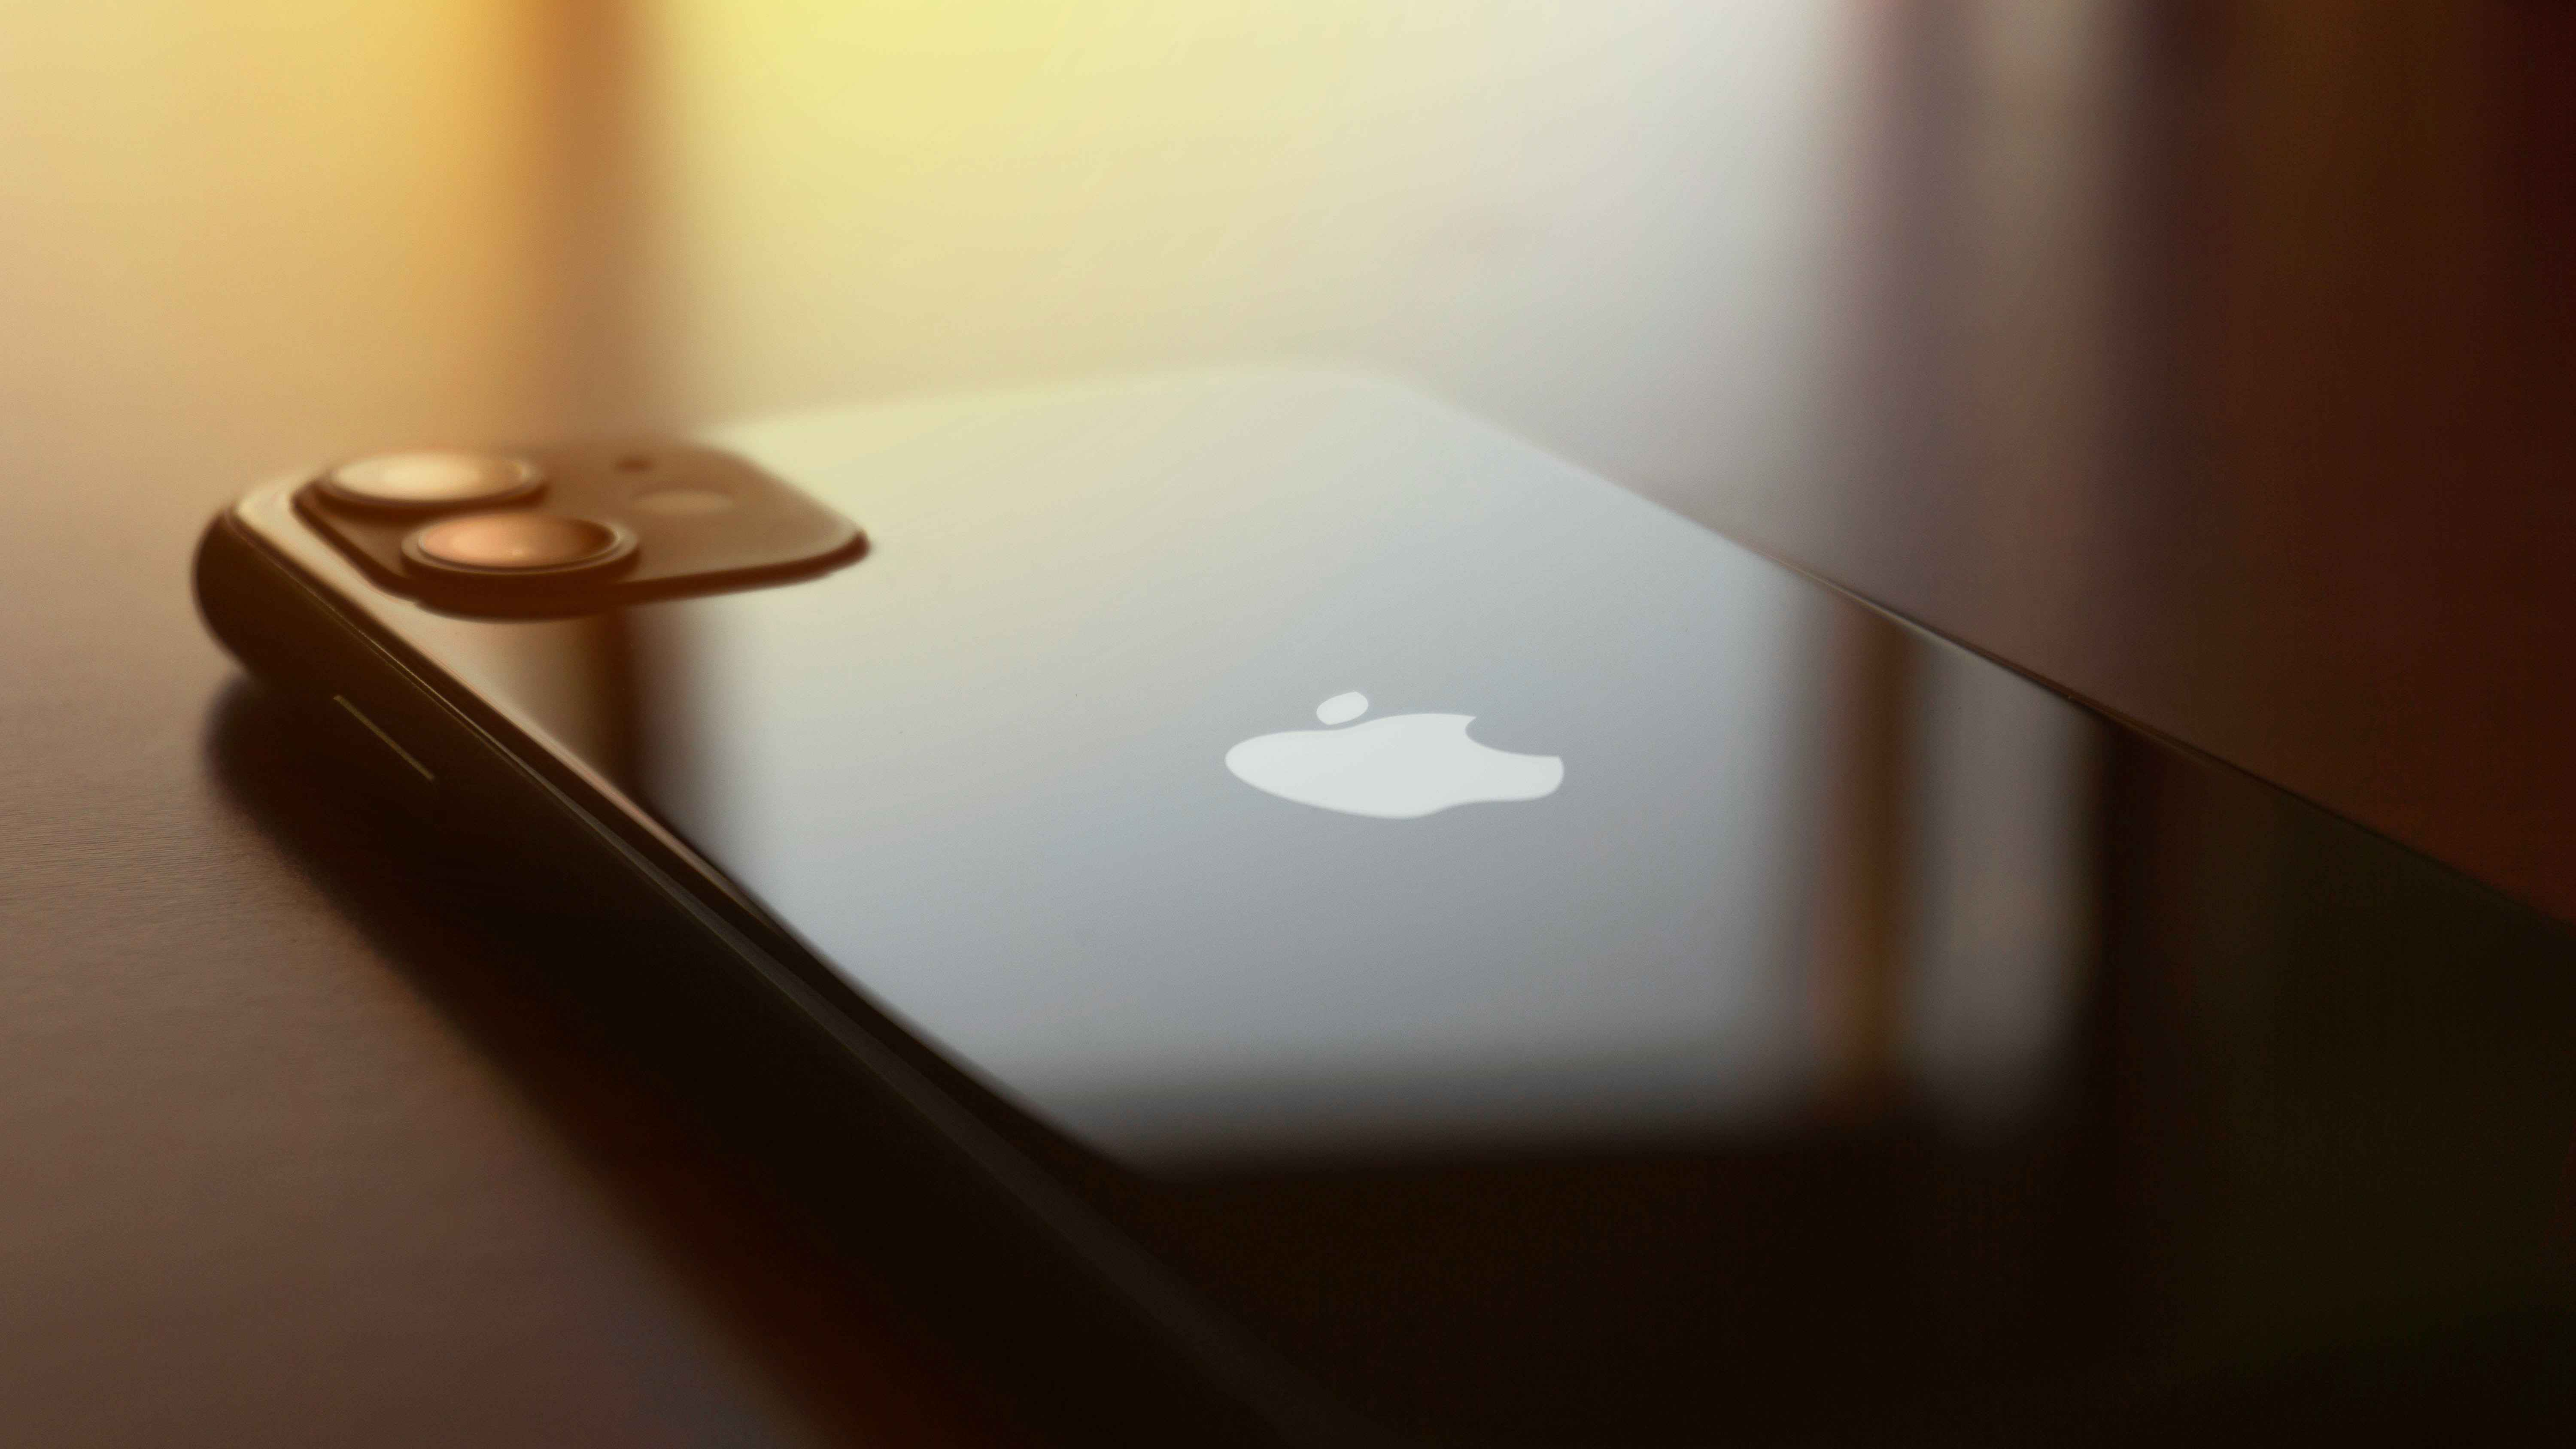 Top 10 Tips to Extend iPhone Battery Life: Save Power and Boost Performance